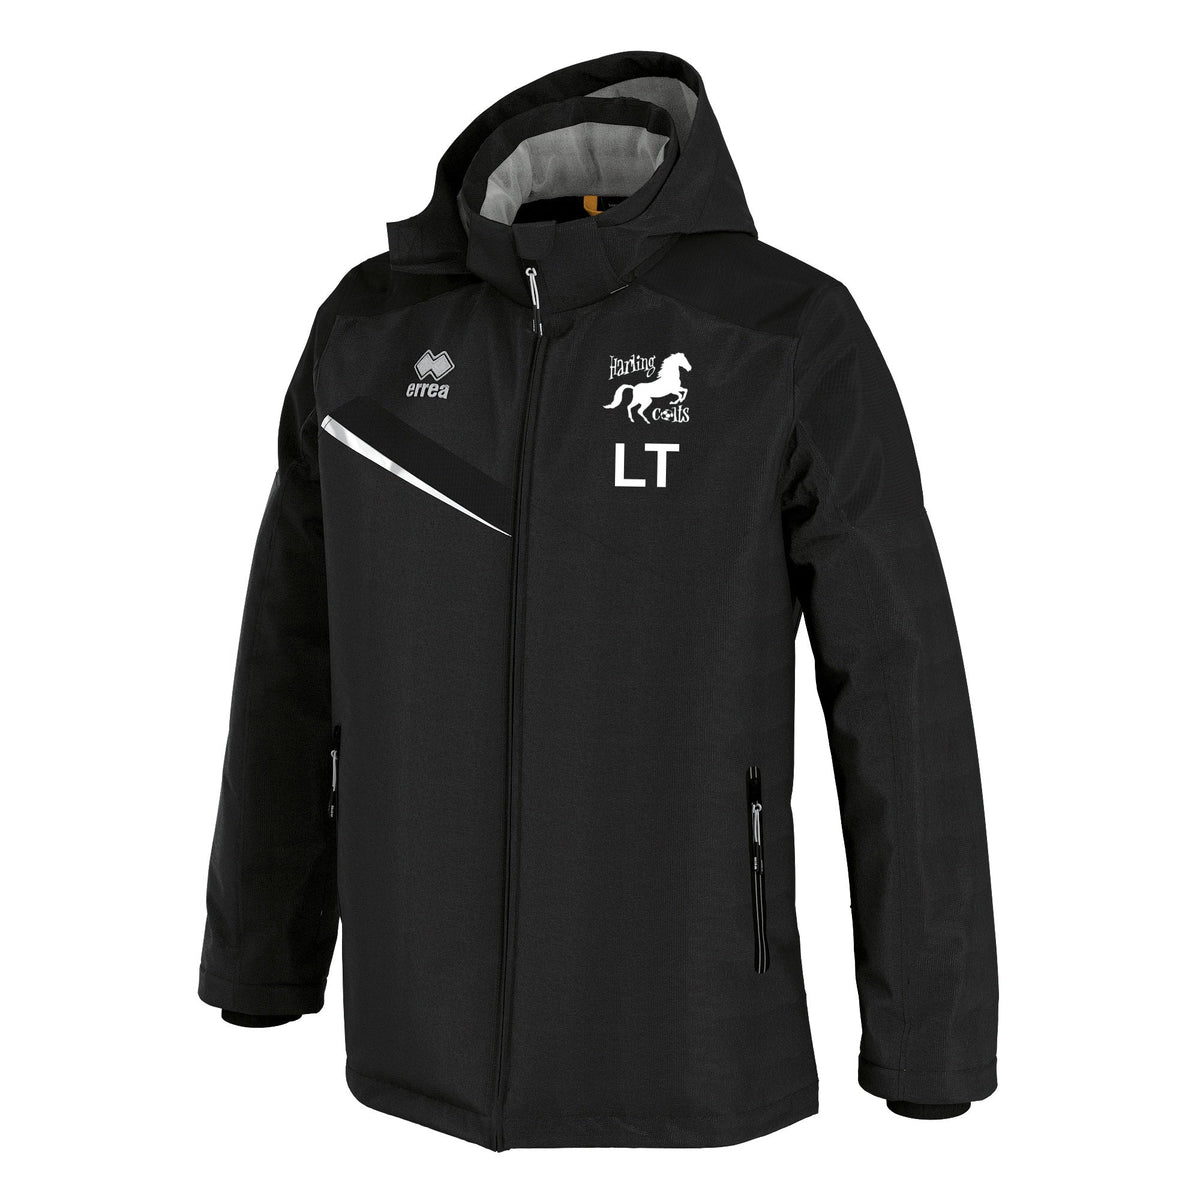 Harling Colts FC Iceland 3.0 Jacket in Junior